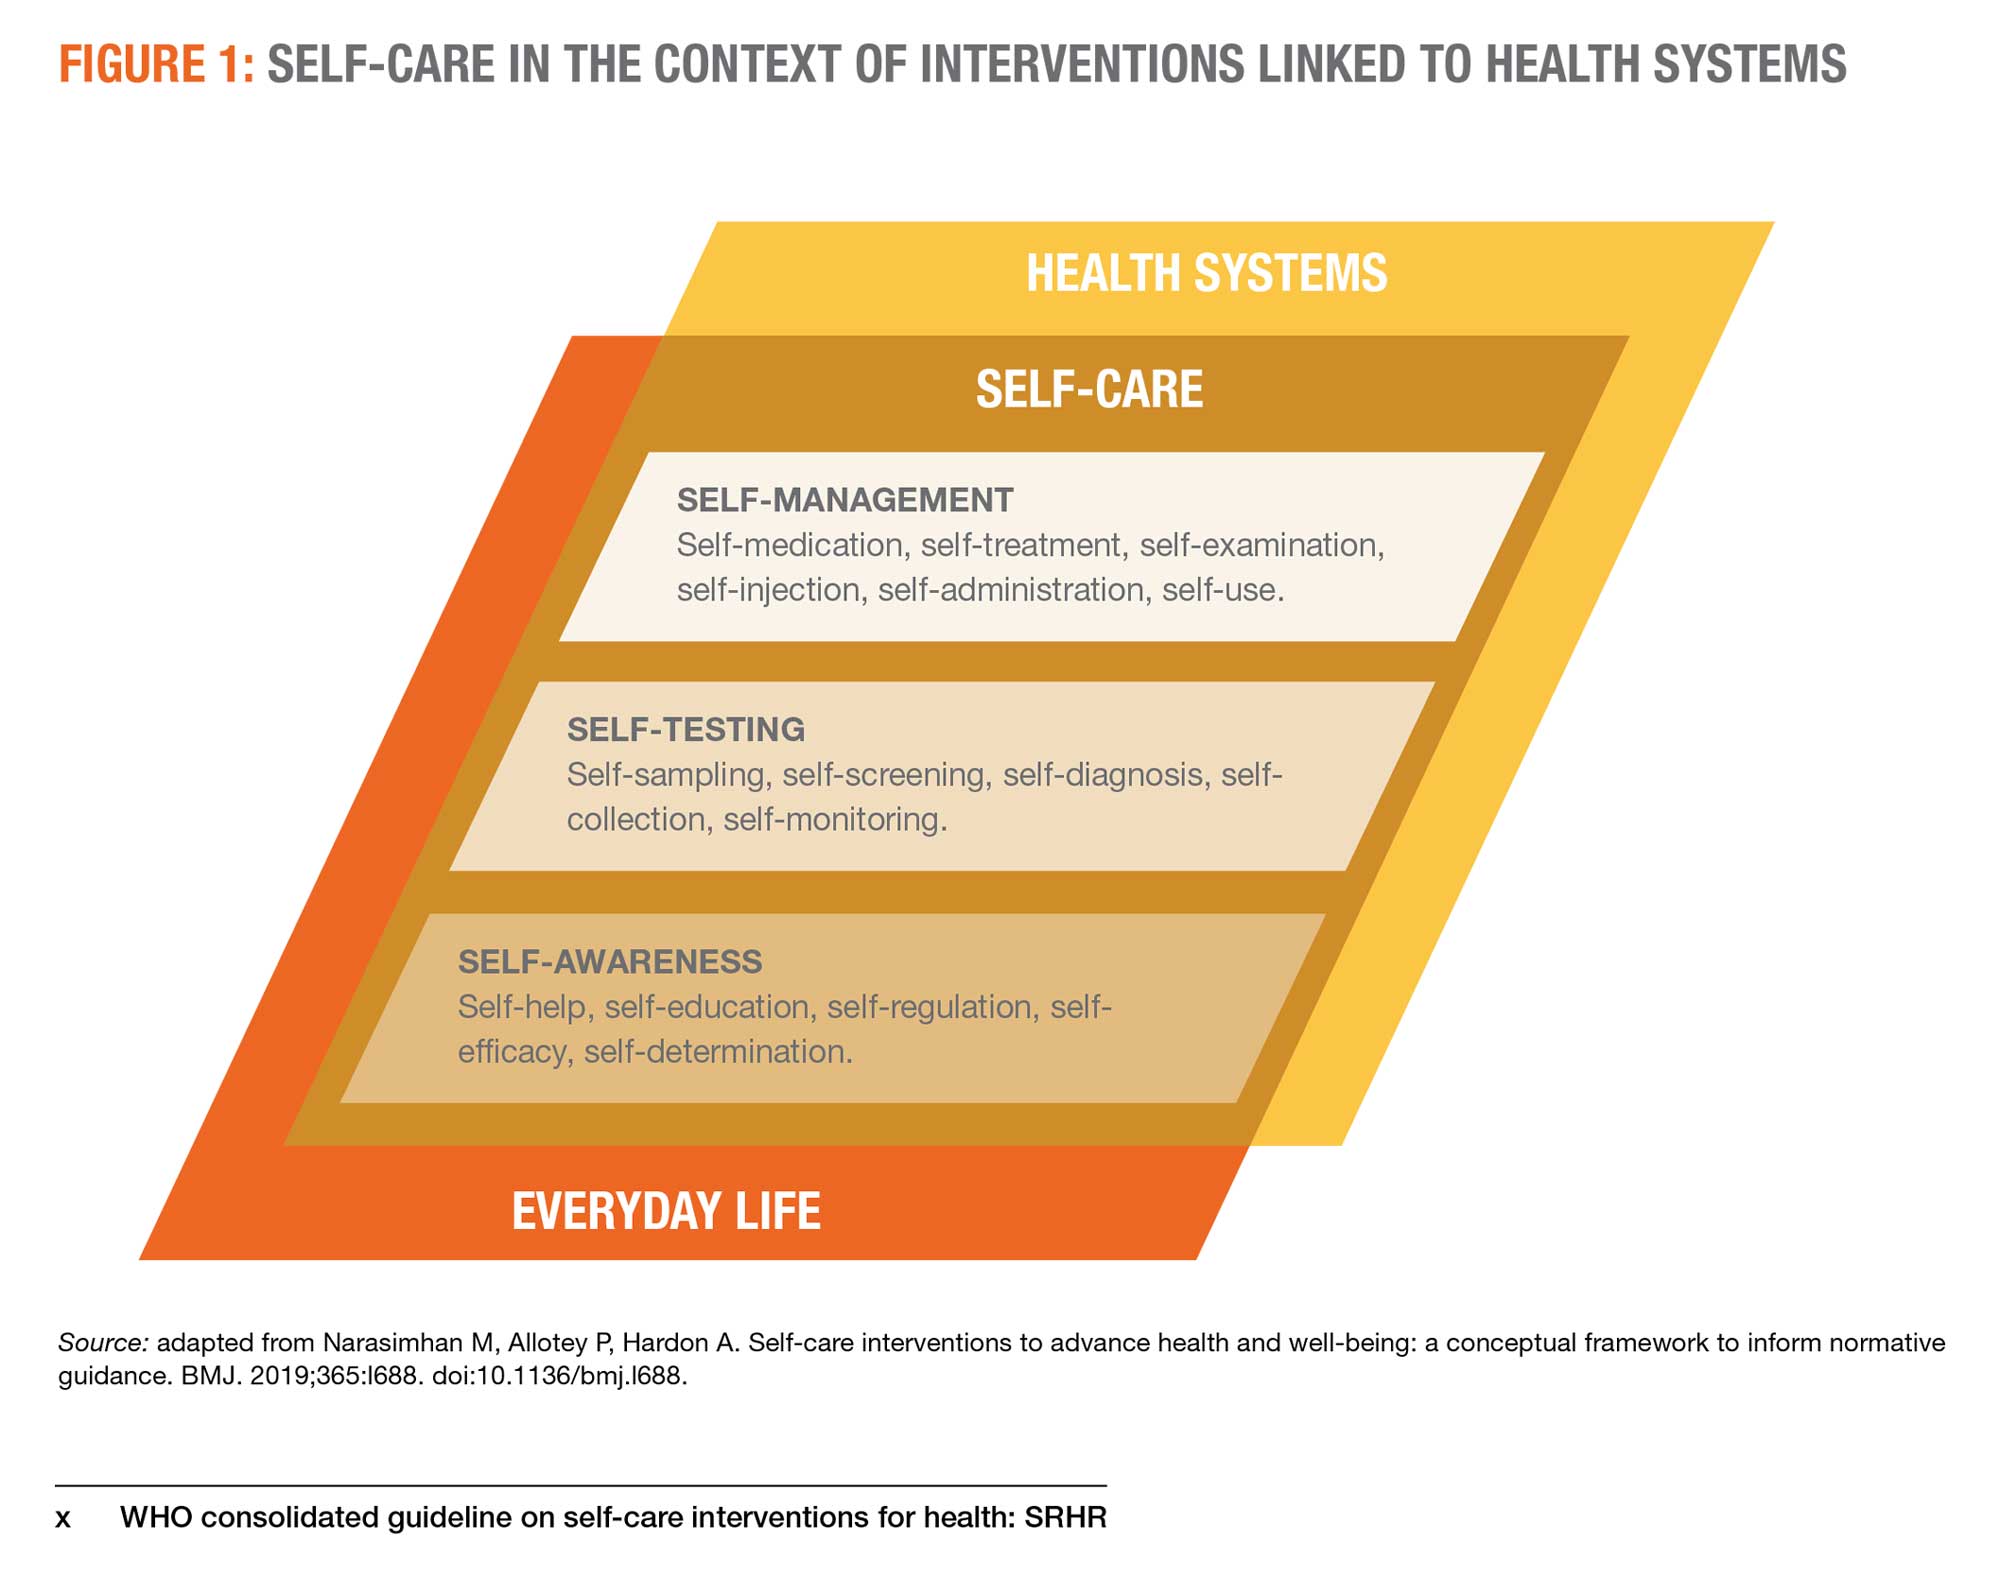 WHO consolidated guideline on self-care interventions for health: SRHR